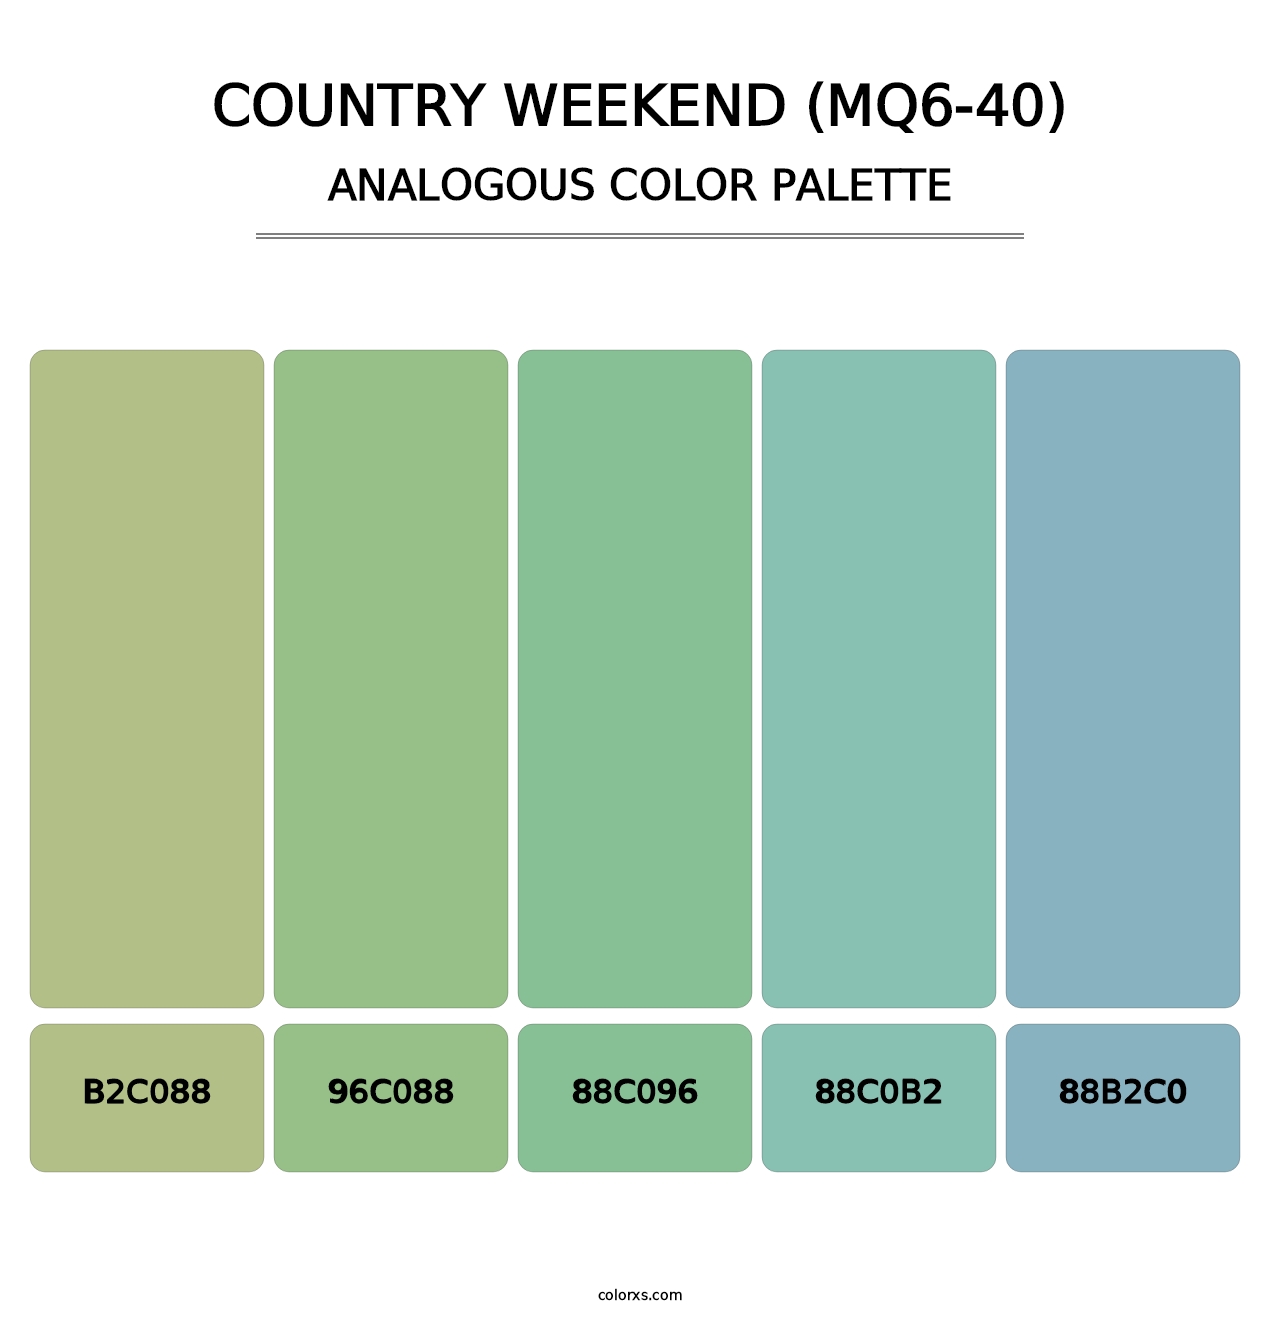 Country Weekend (MQ6-40) - Analogous Color Palette